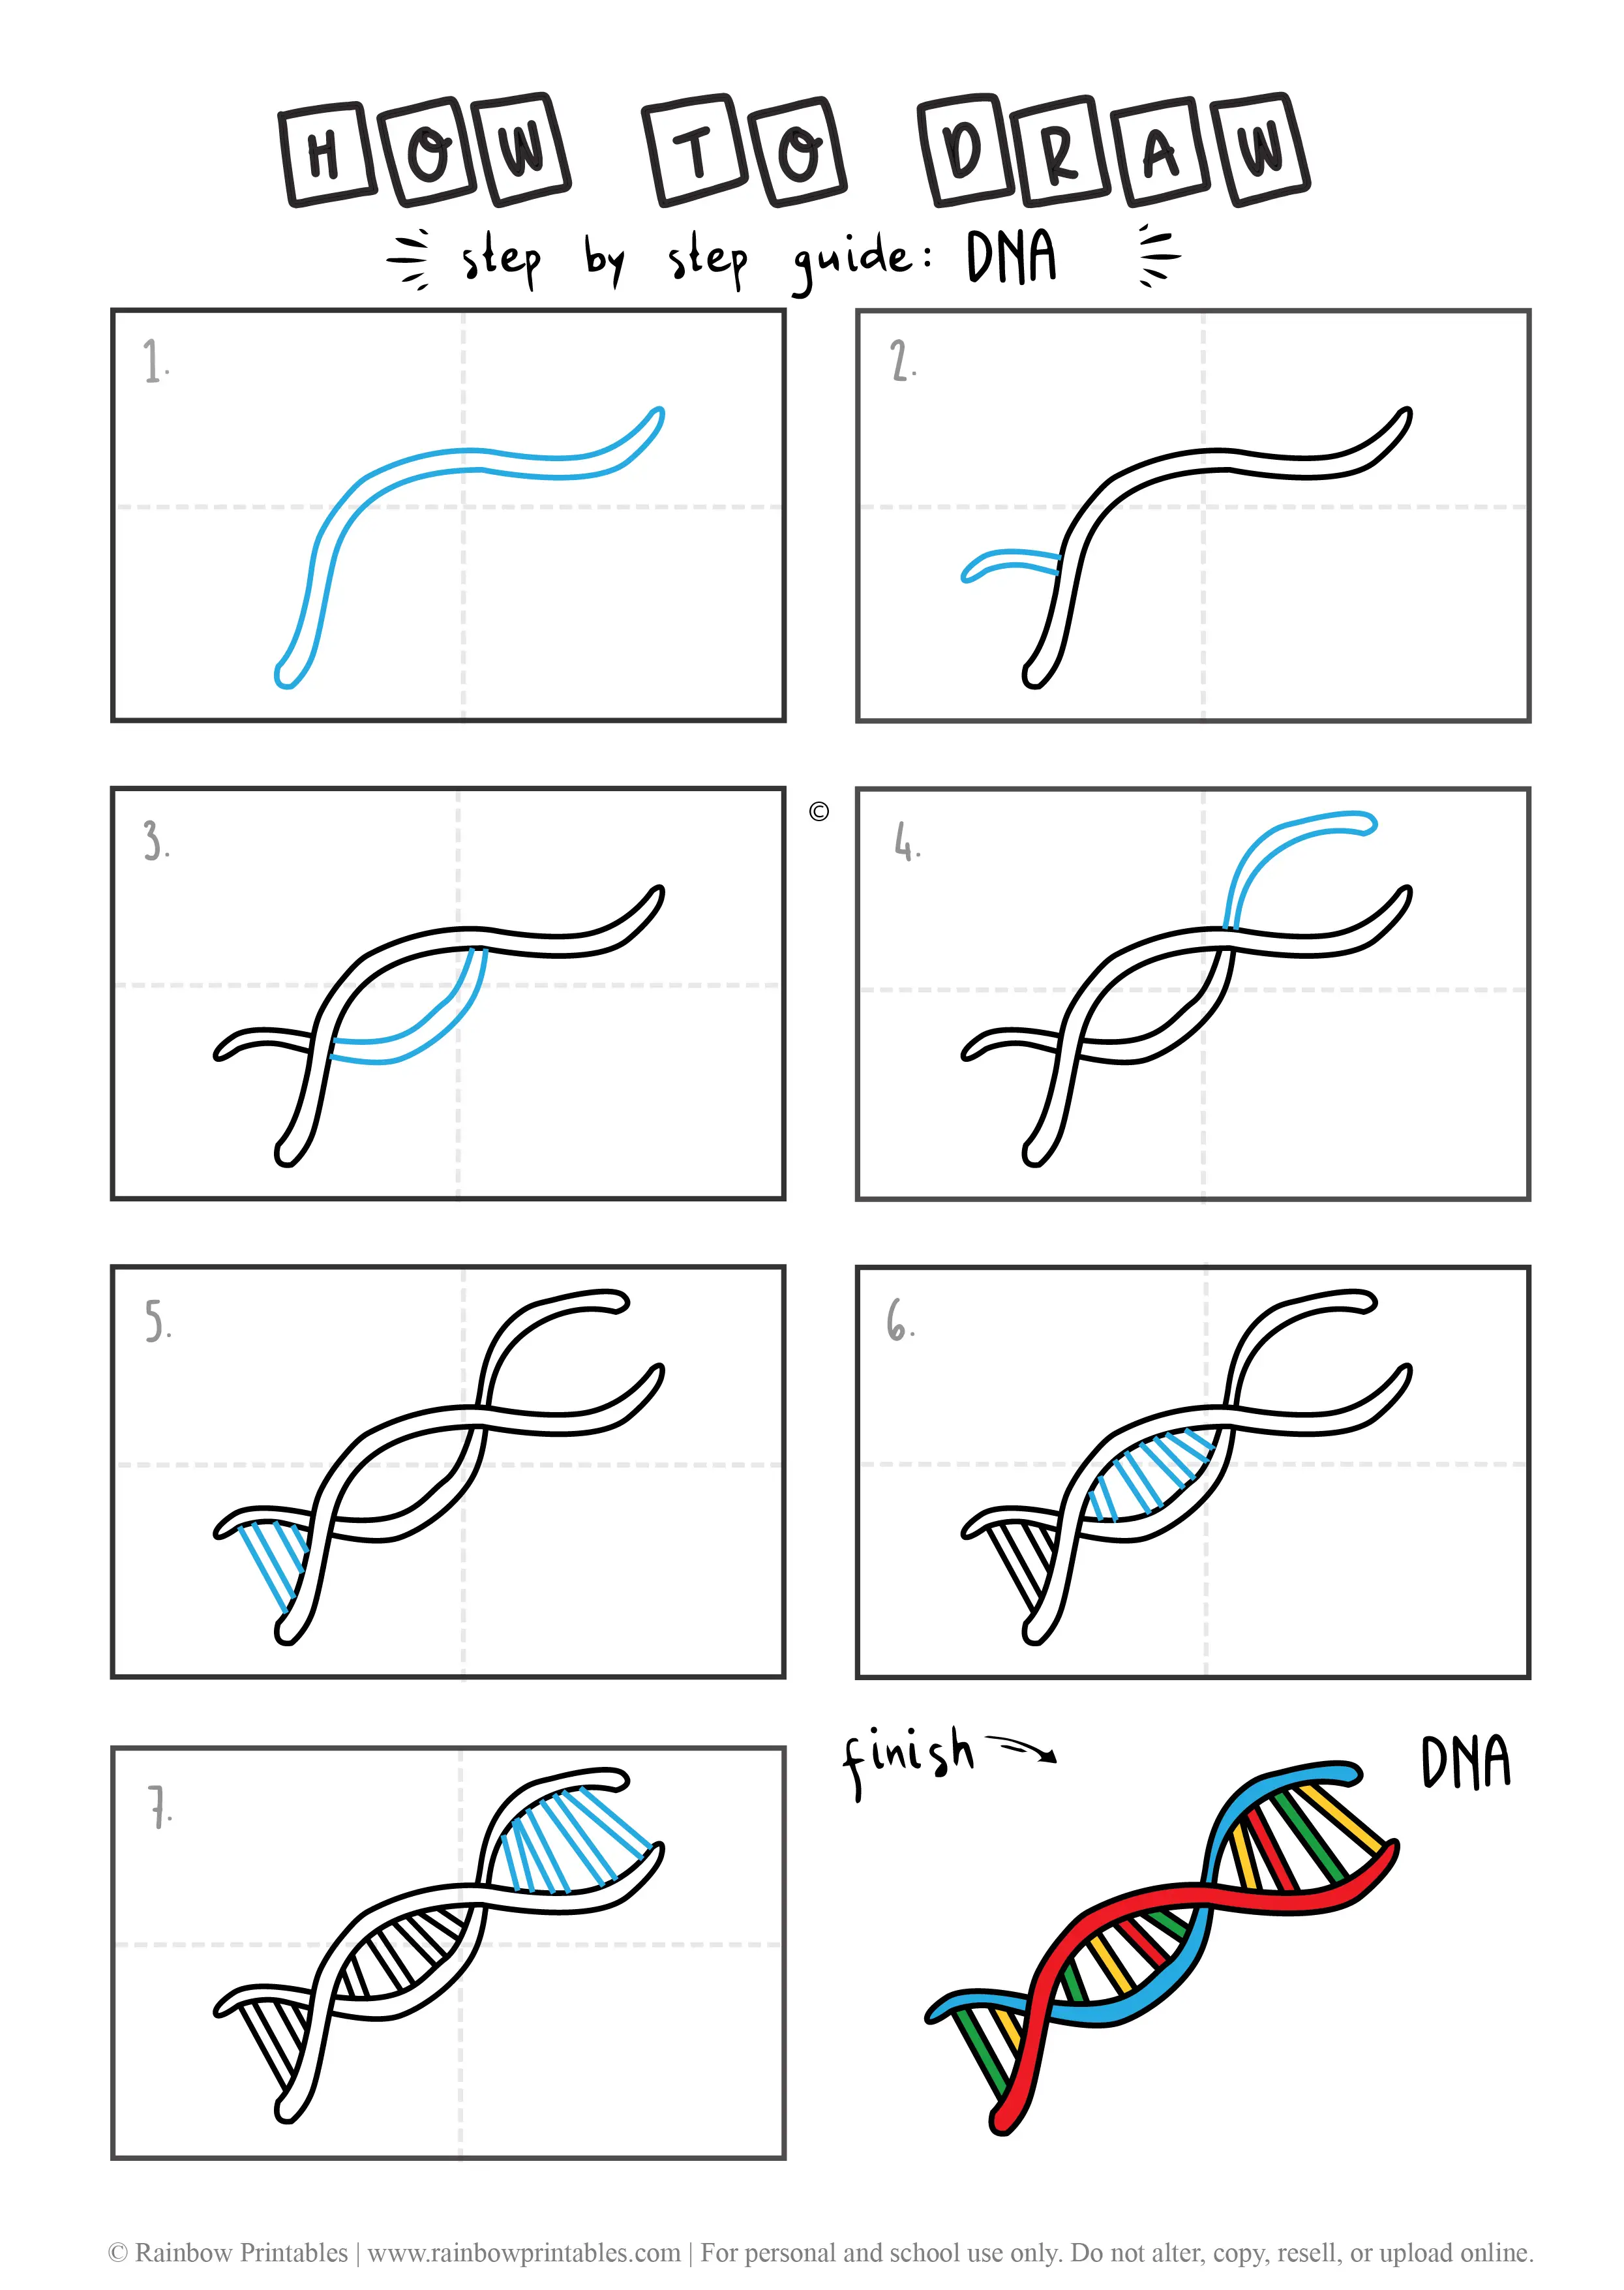 HOW TO DRAW A DNA STRAND GUIDE ILLUSTRATION STEP BY STEP EASY SIMPLE FOR KIDS Final